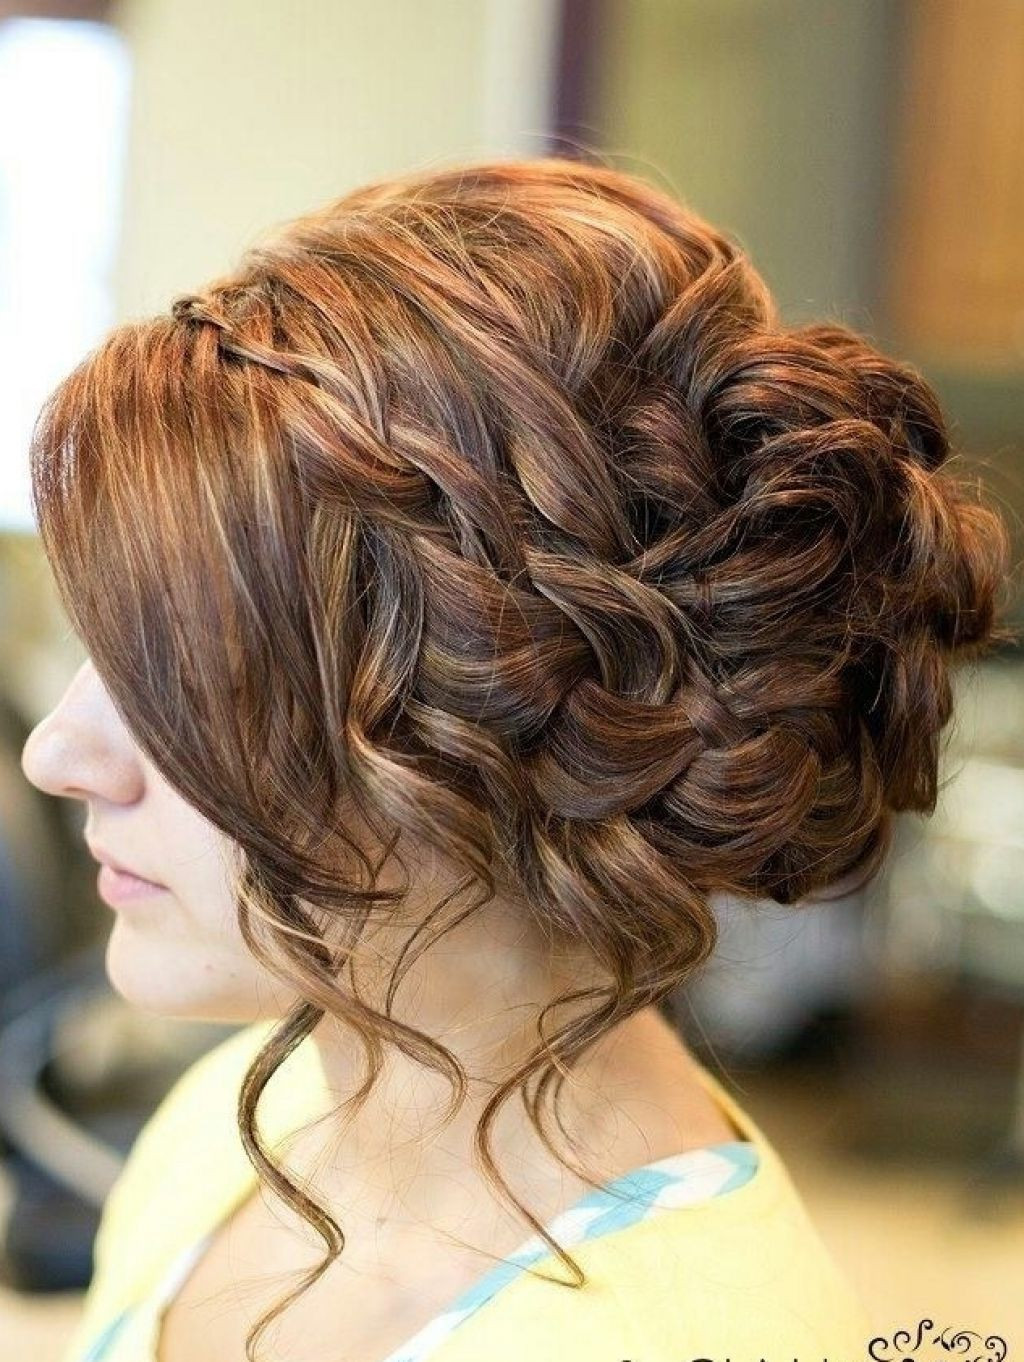 Prom Hairstyles Updo
 14 Prom Hairstyles for Long Hair that are Simply Adorable